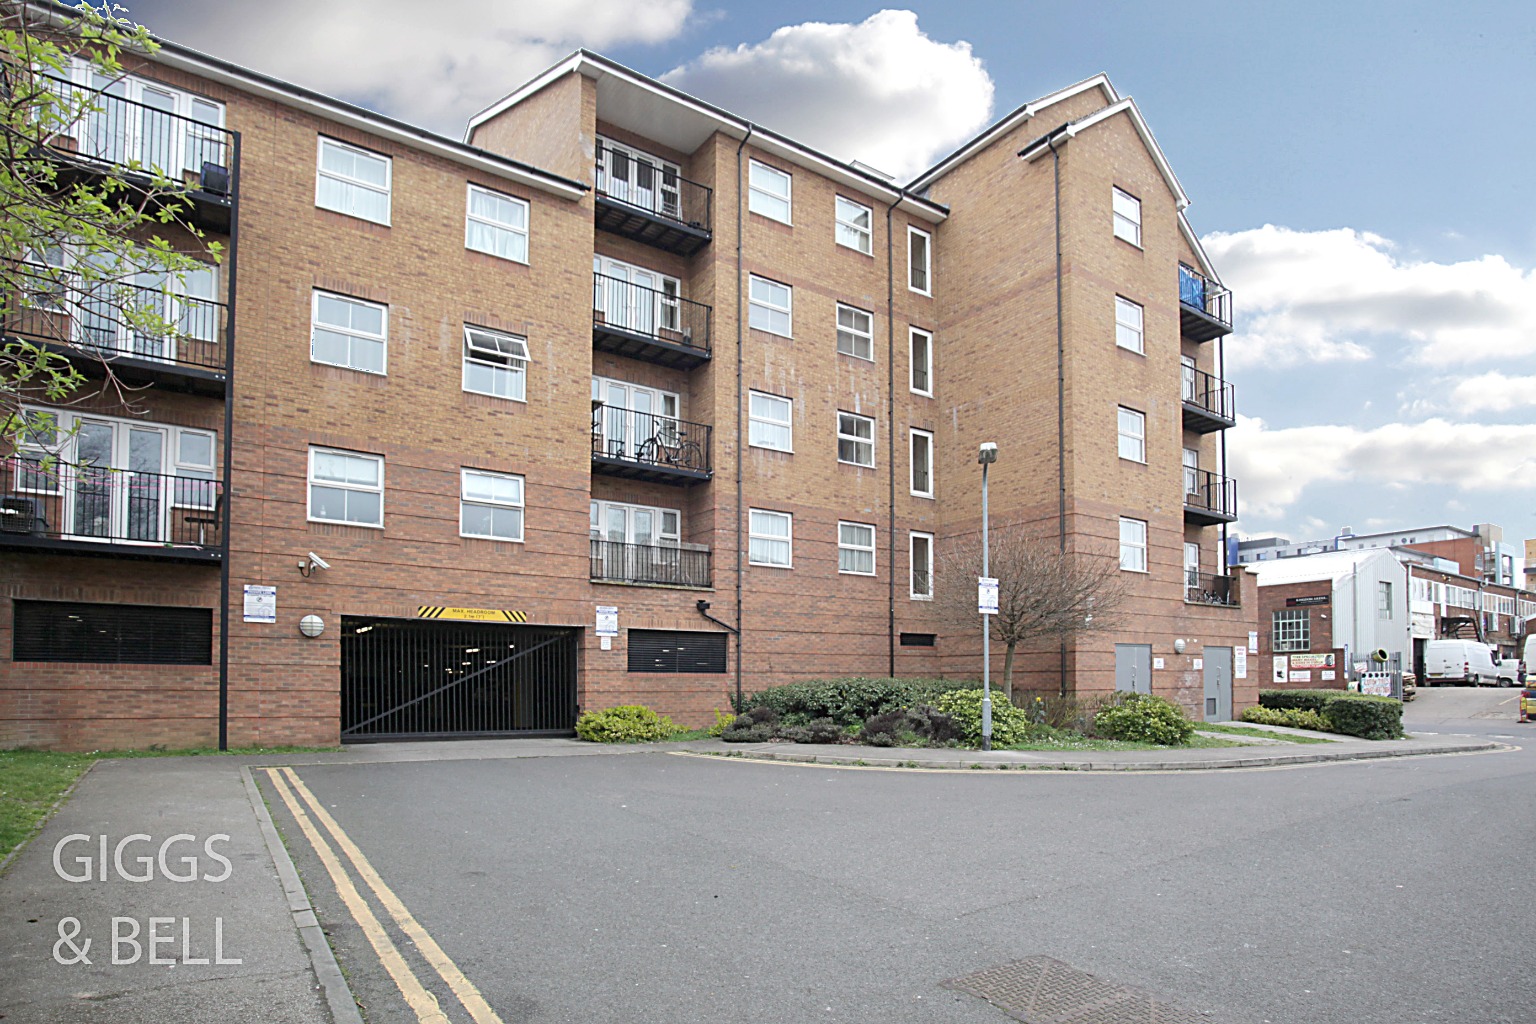 2 bed ground floor flat for sale in Holly Street, Luton, LU1 